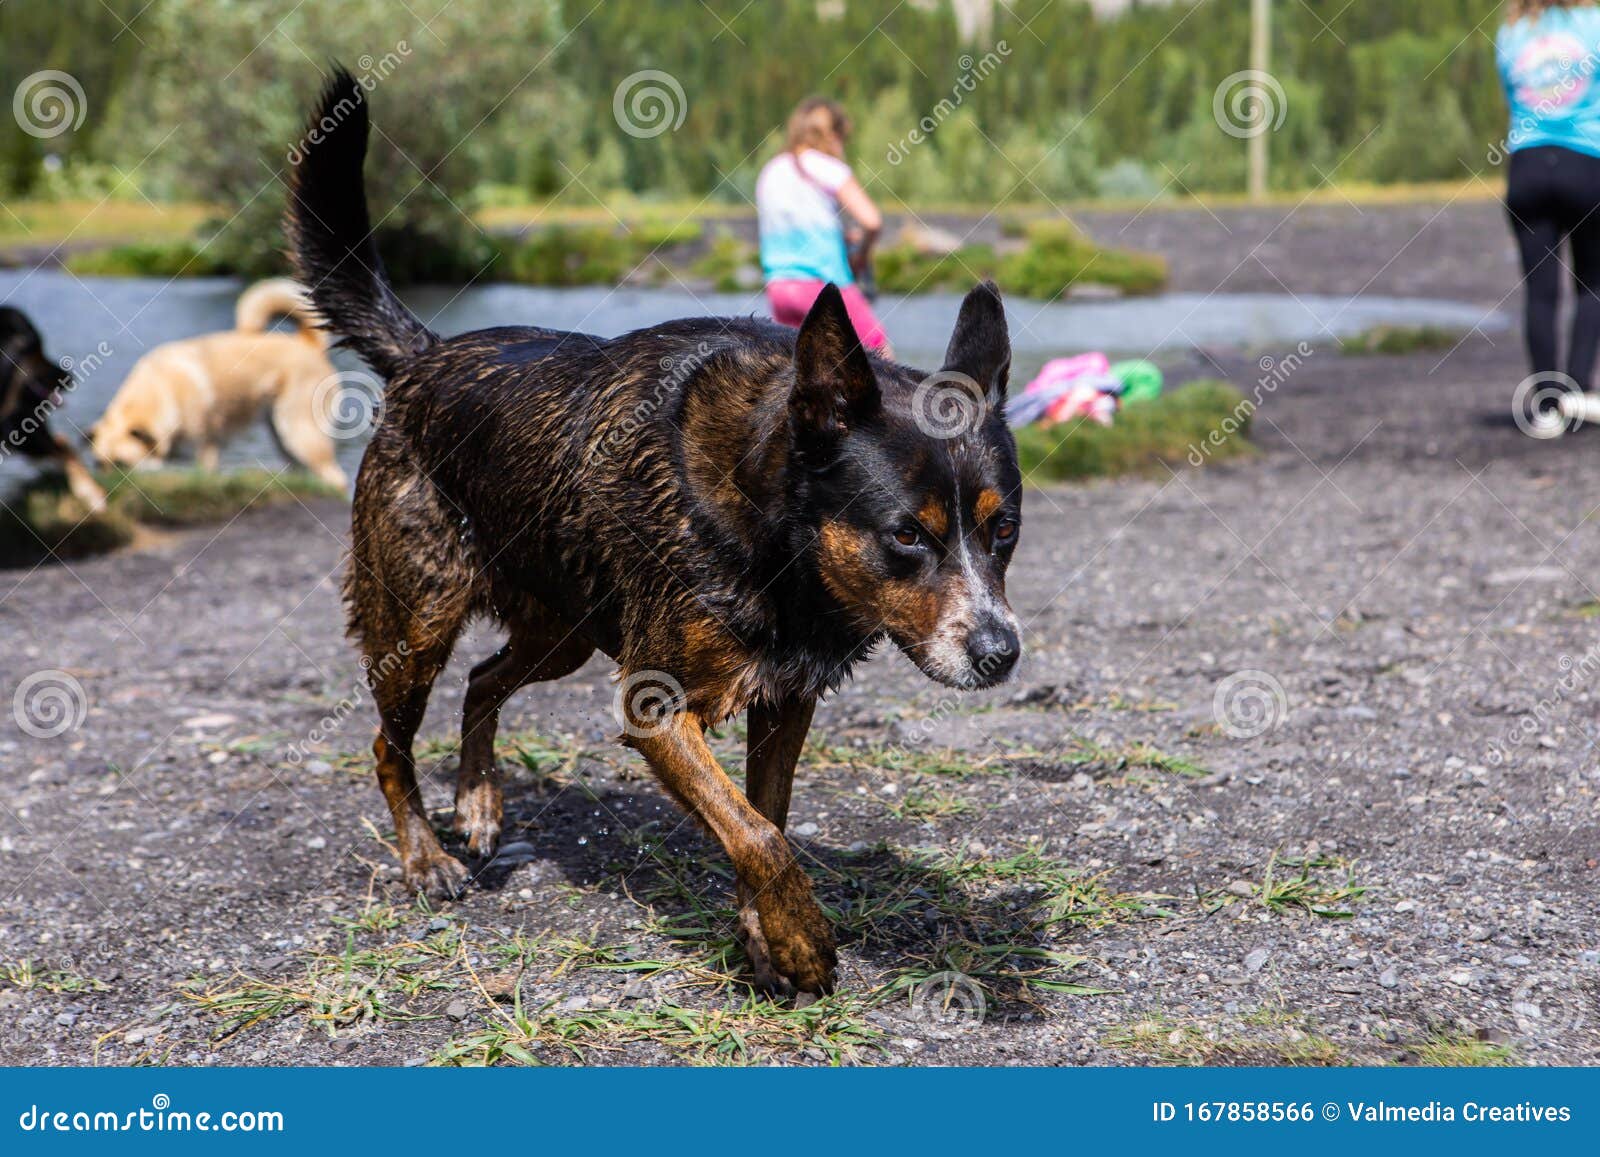 Small Mixed Breed Dog Dripping Water Stock Photo - Image of furry, pine